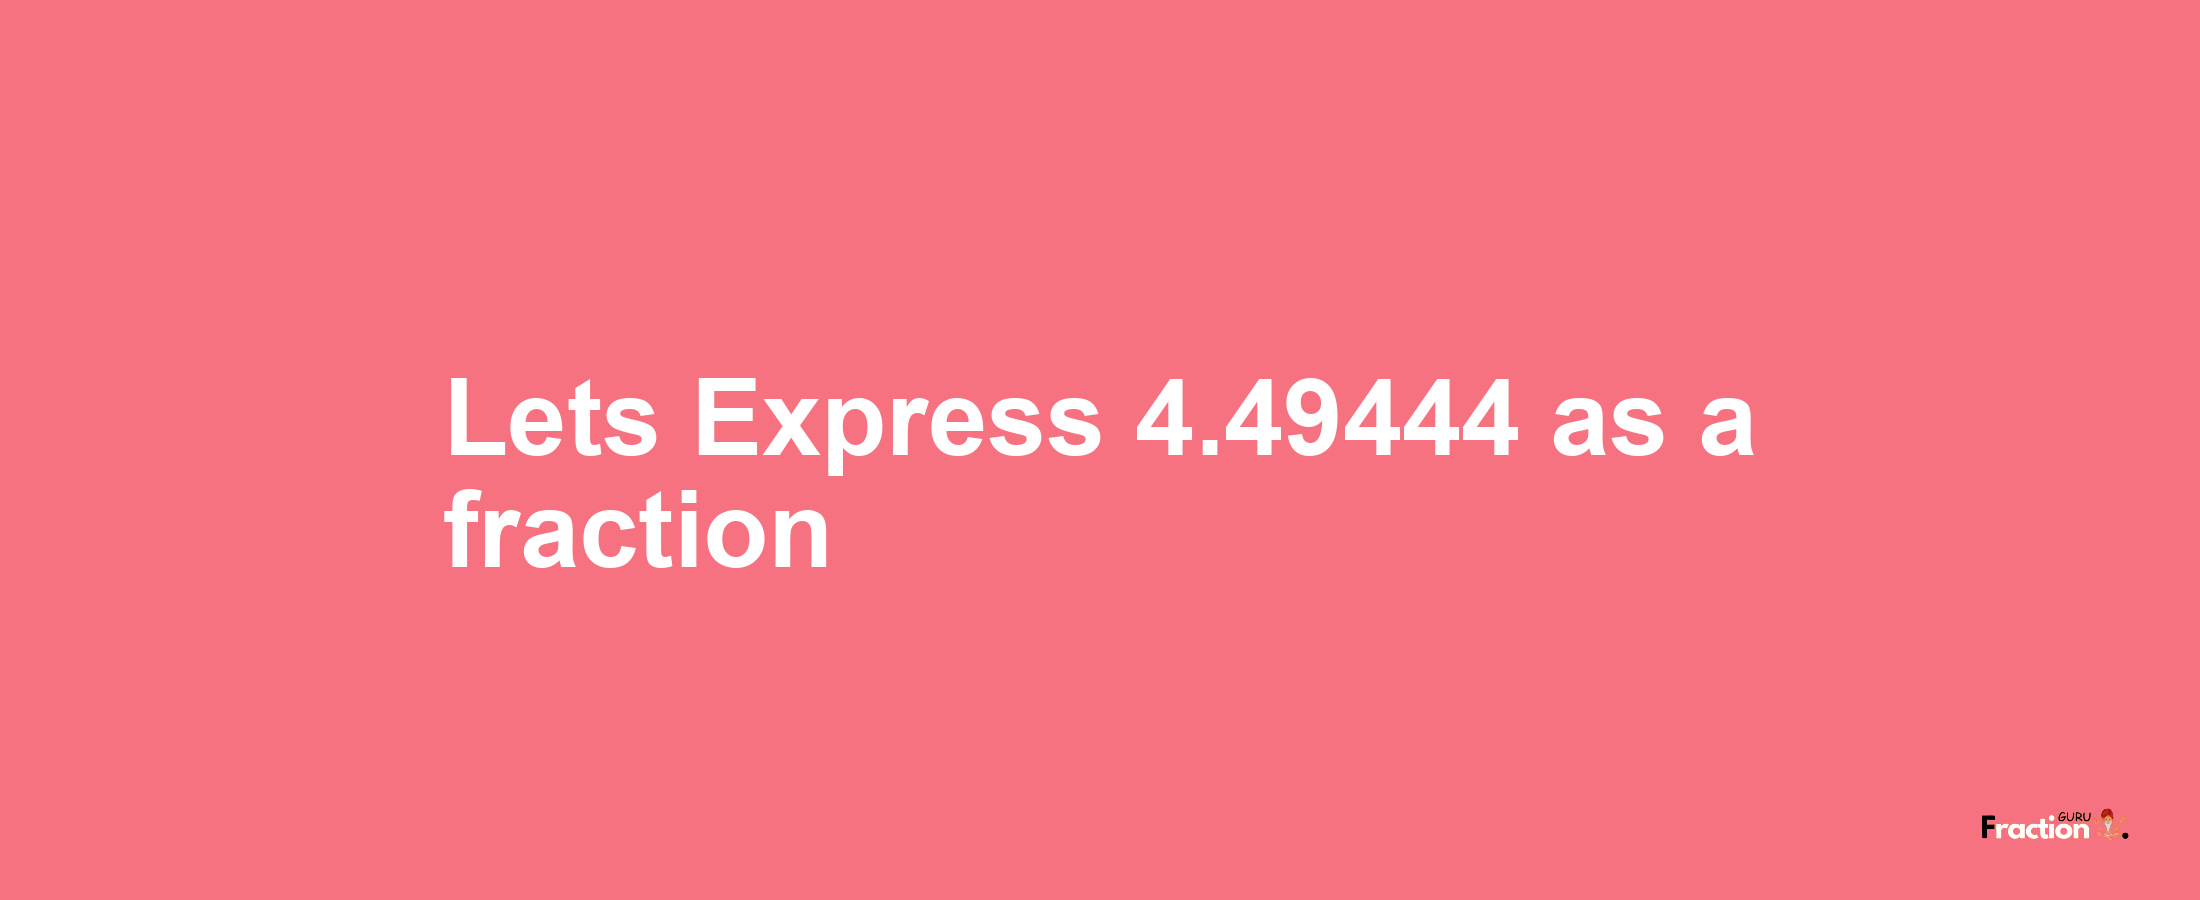 Lets Express 4.49444 as afraction